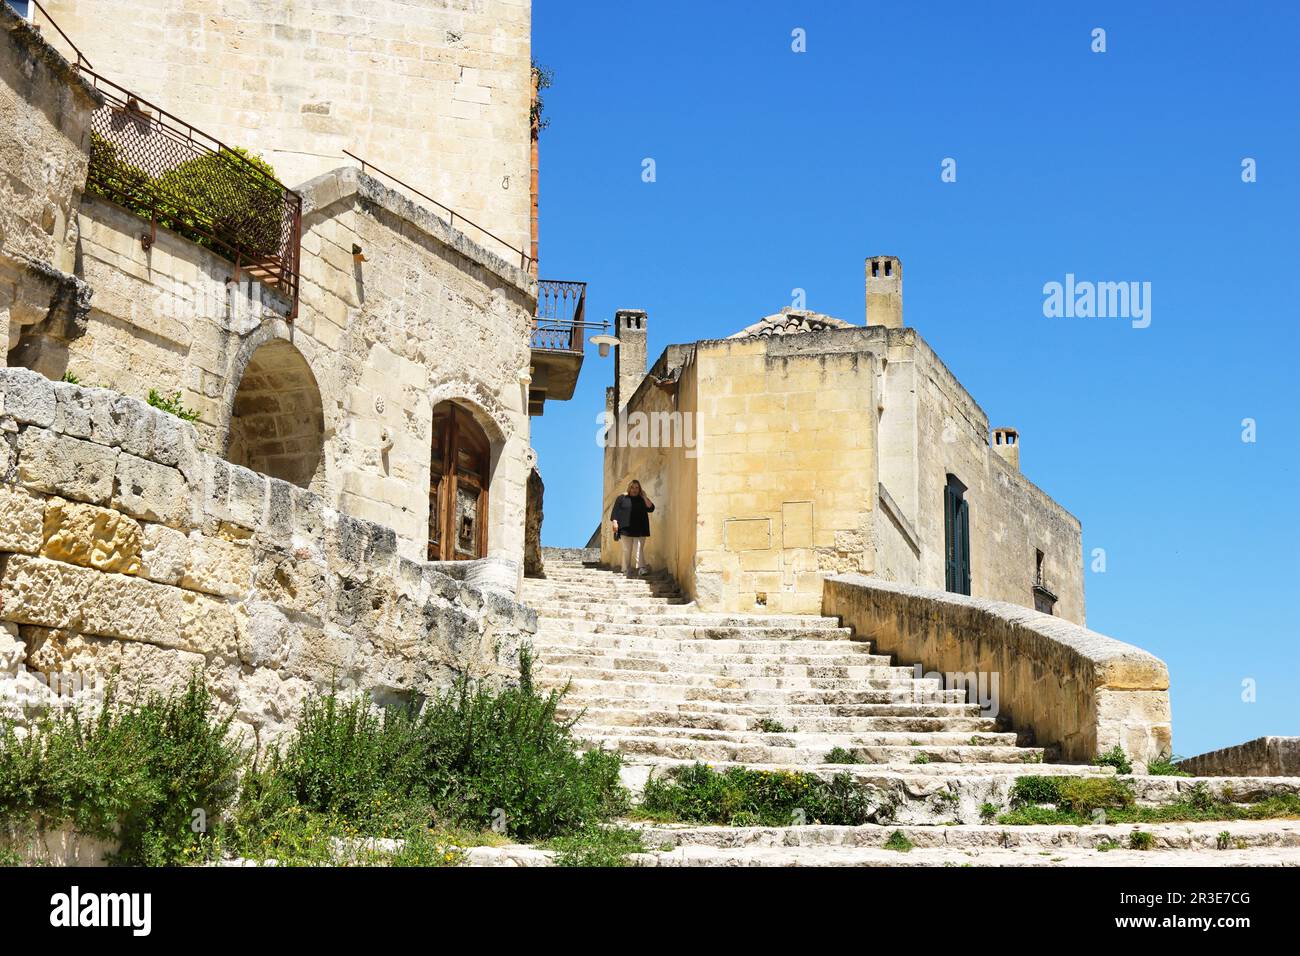 Moments in local daily life in the historic Sassi of Matera, Basilicata region of Italy. Solitary figure, descending on the stairs of old street. Stock Photo